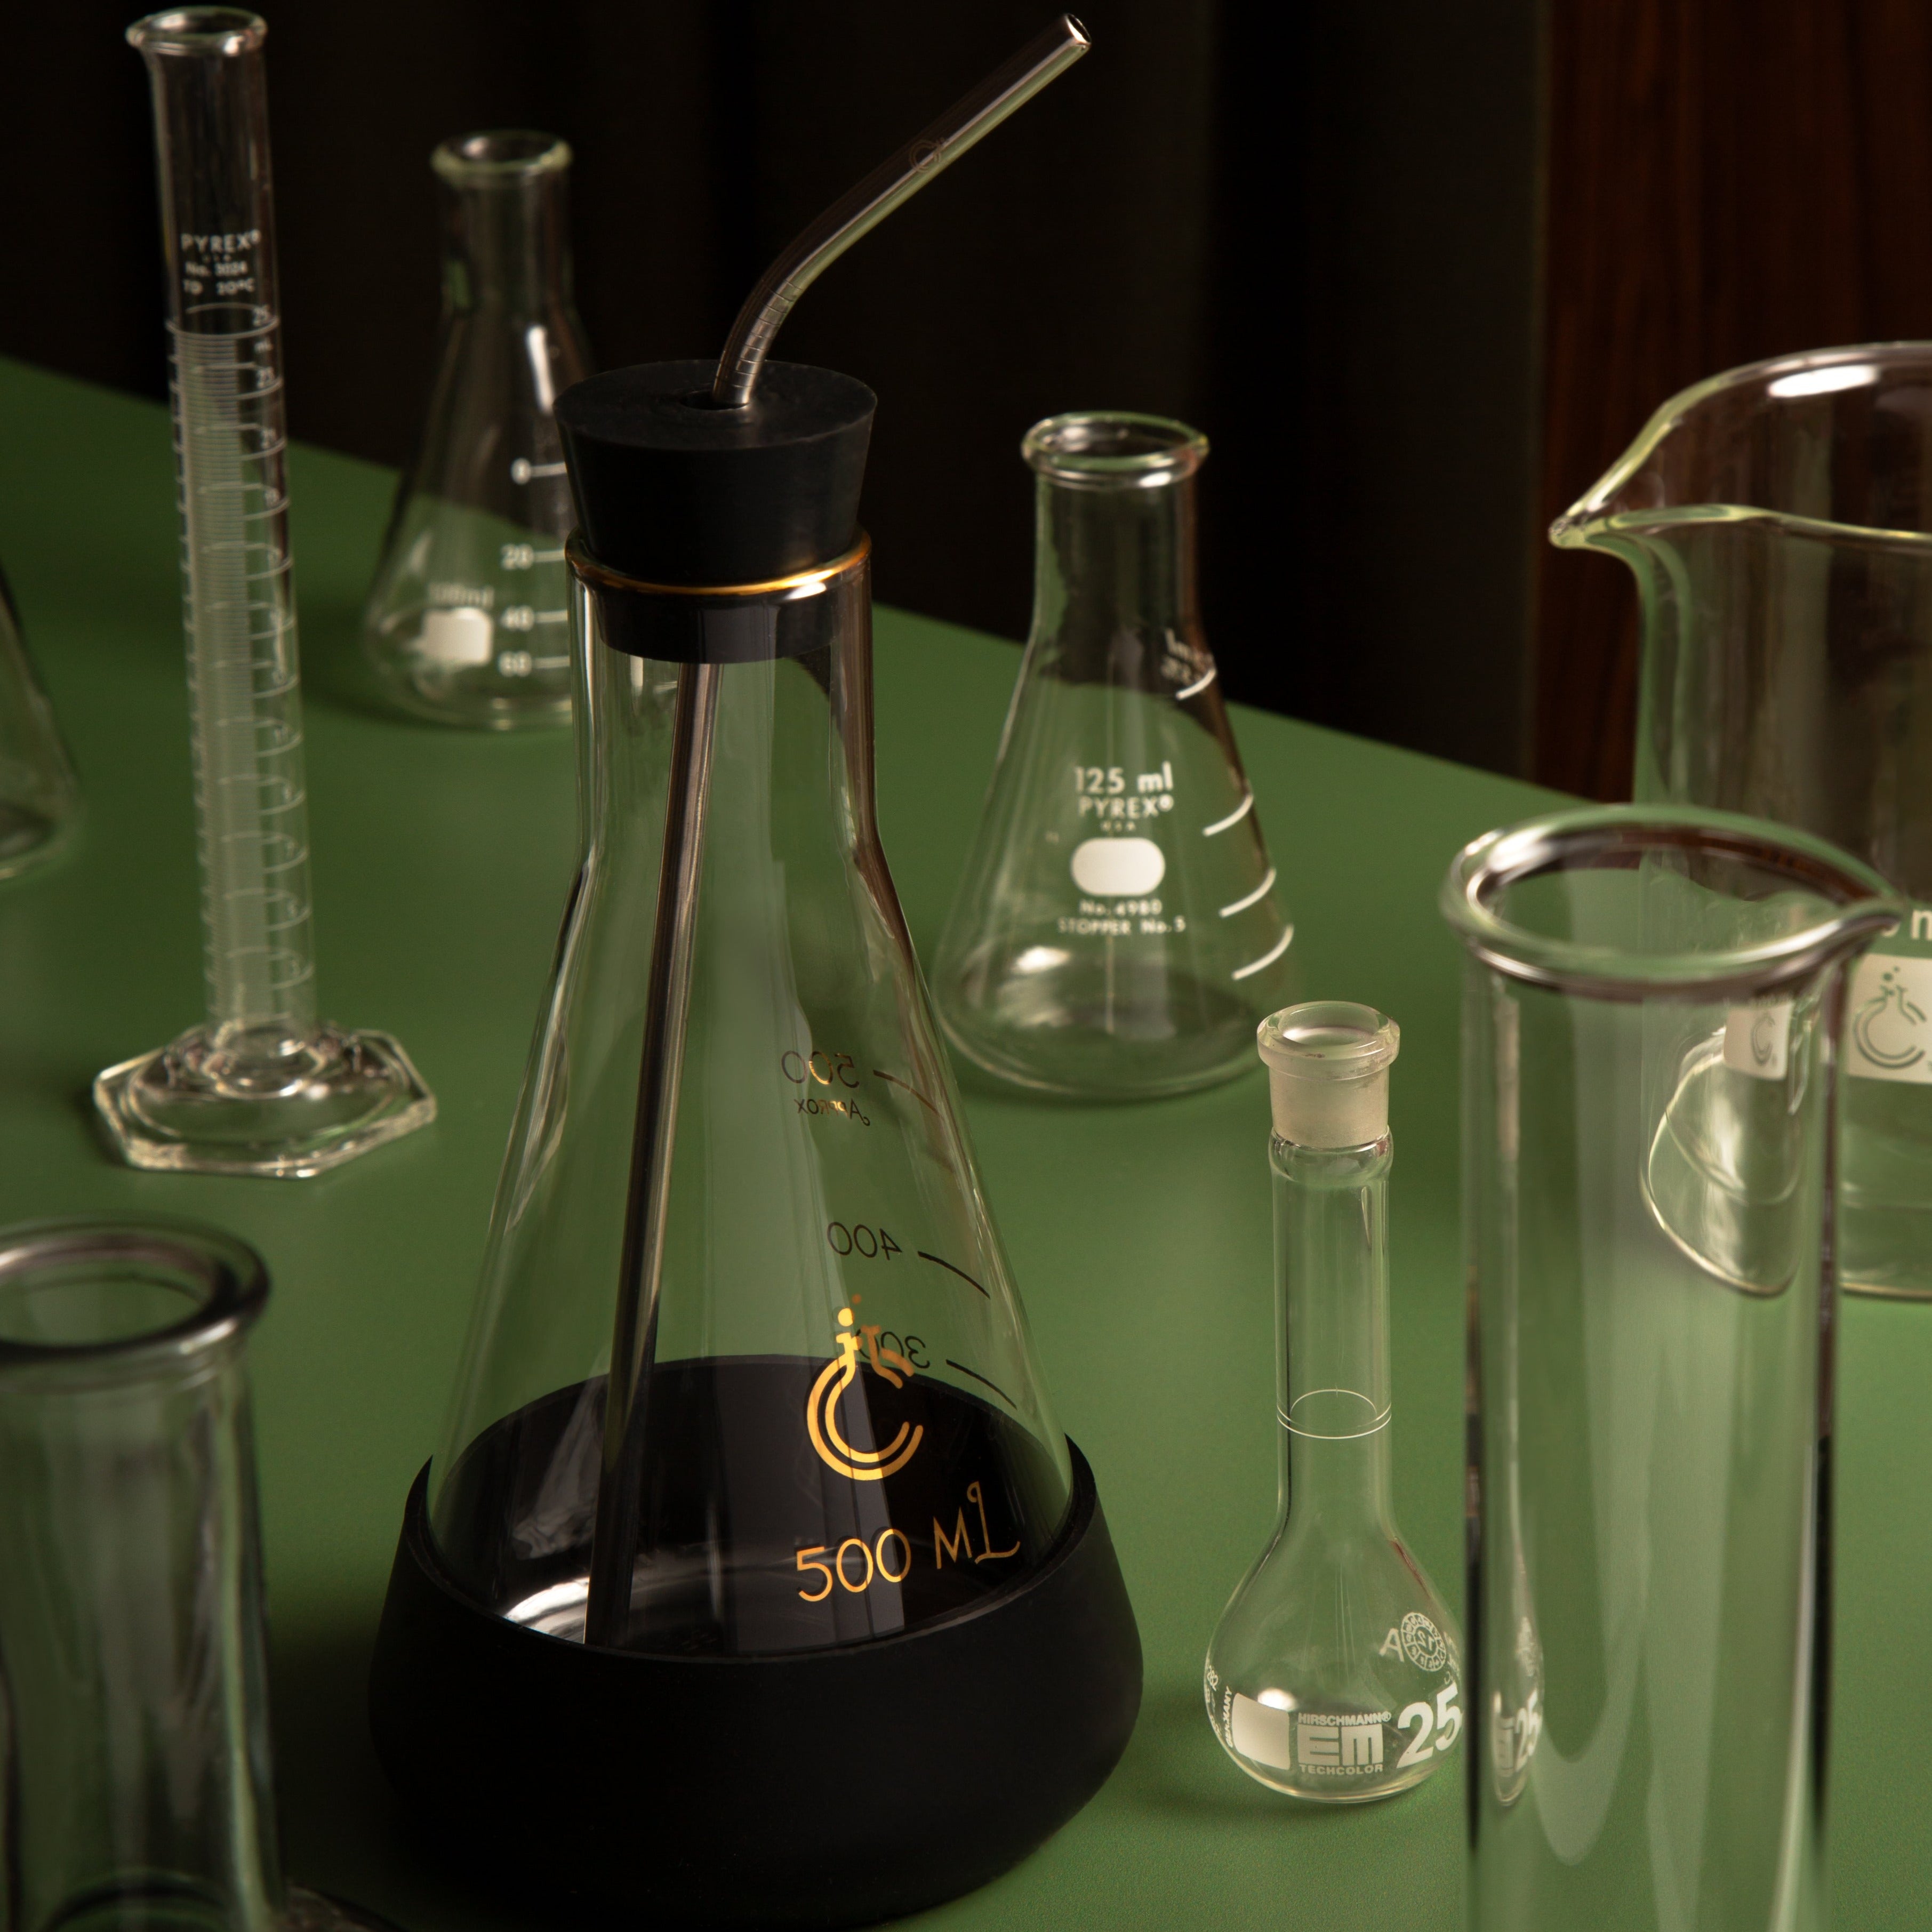 Erlenmeyer Flask Drink Tumbler is a great science-inspired gift for STEM enthusiasts